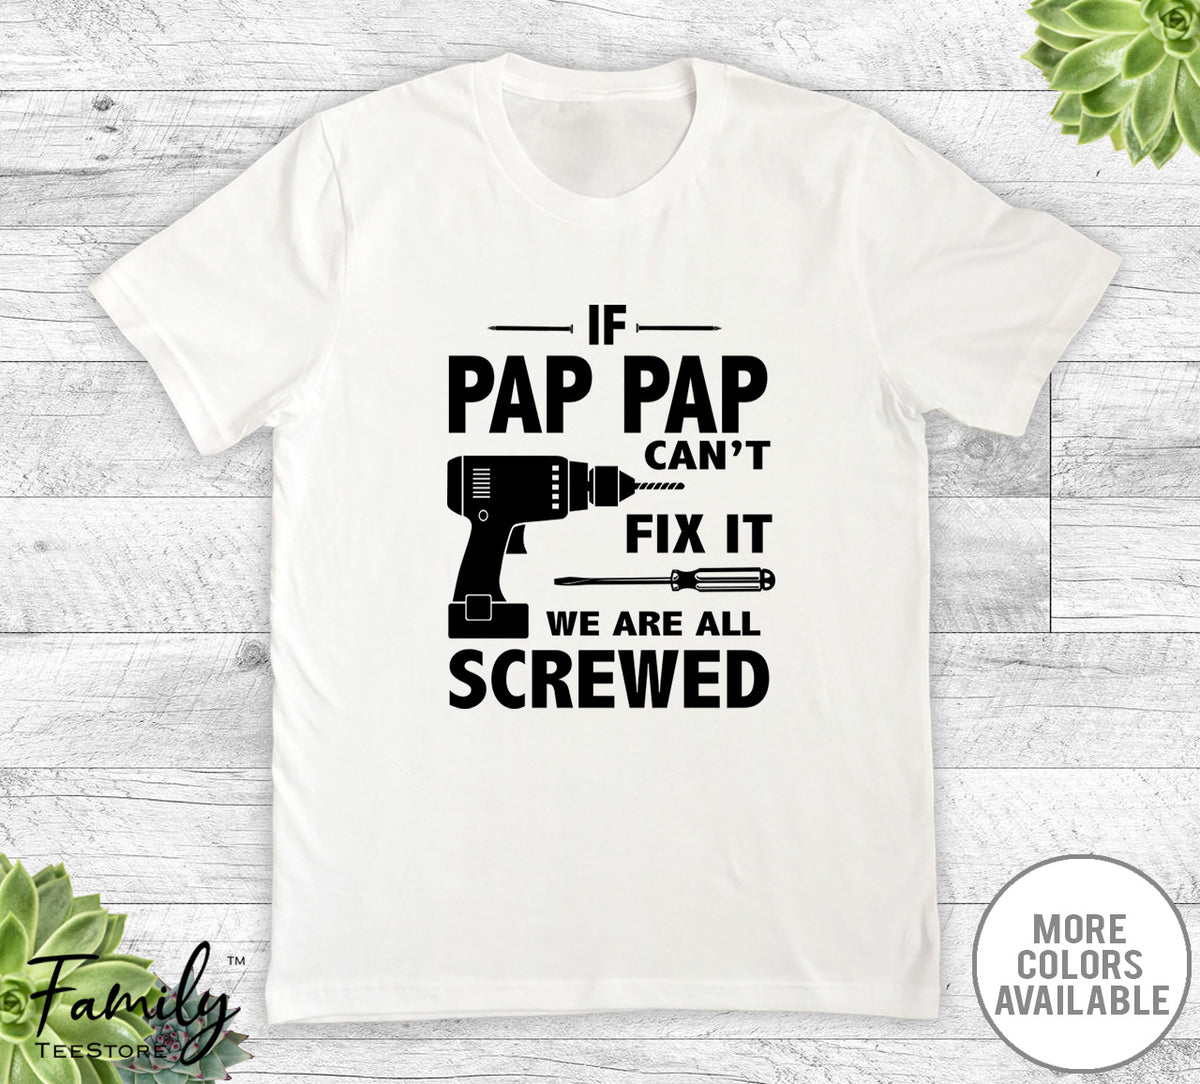 If Pap Pap Can't Fix It We Are All Screwed - Unisex T-shirt - Pap Pap Shirt - Pap Pap Gift